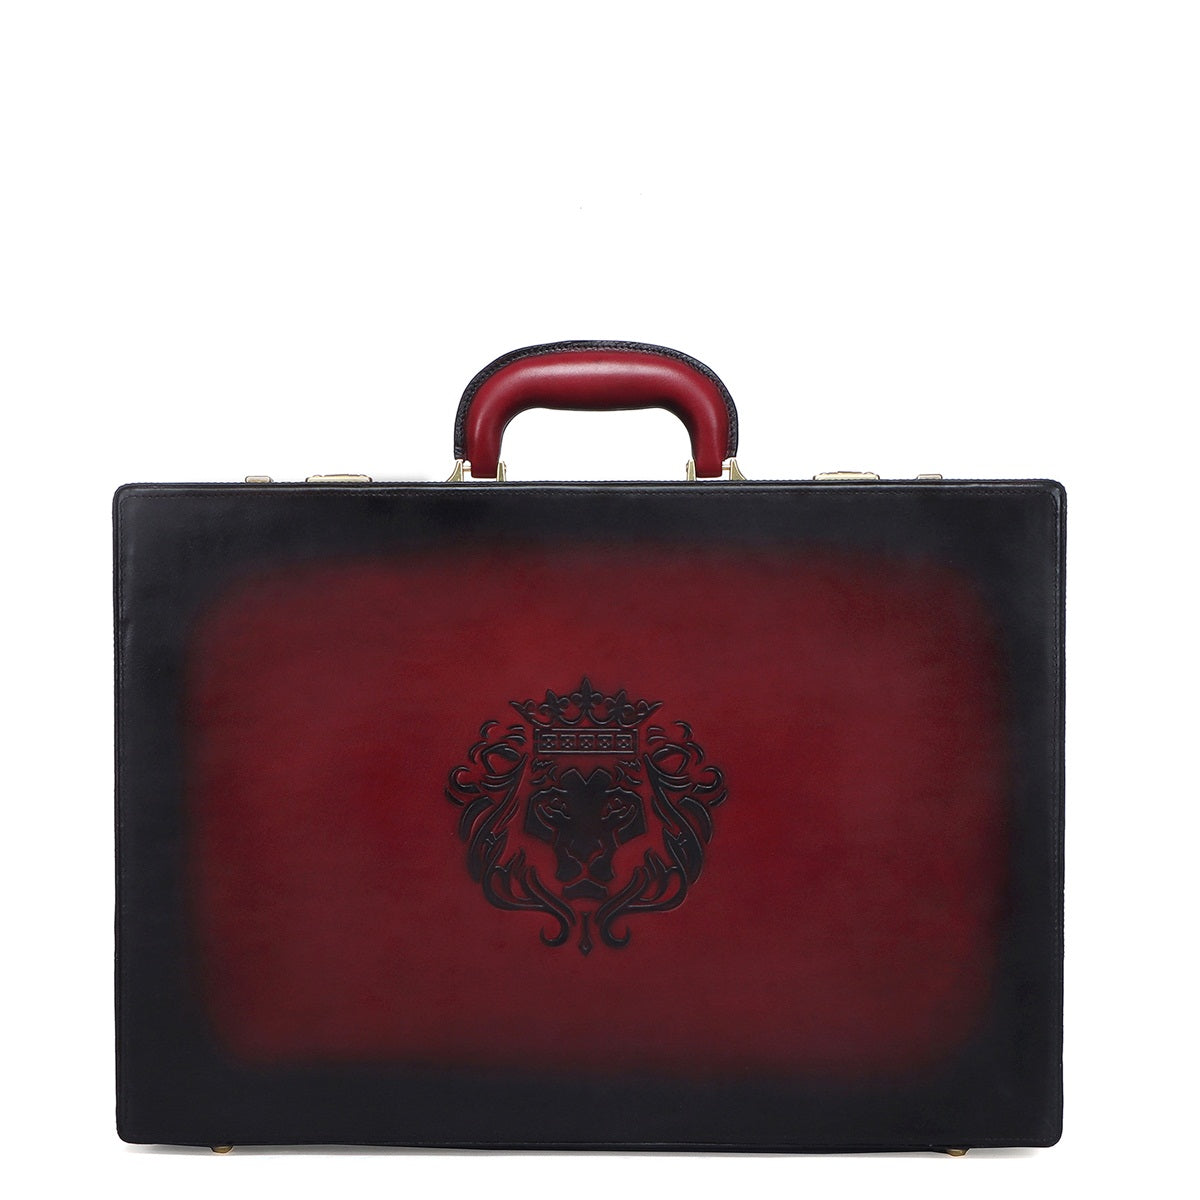 Hand-Painted Office Briefcase In Wine Leather Hard Case With Numeric Lock